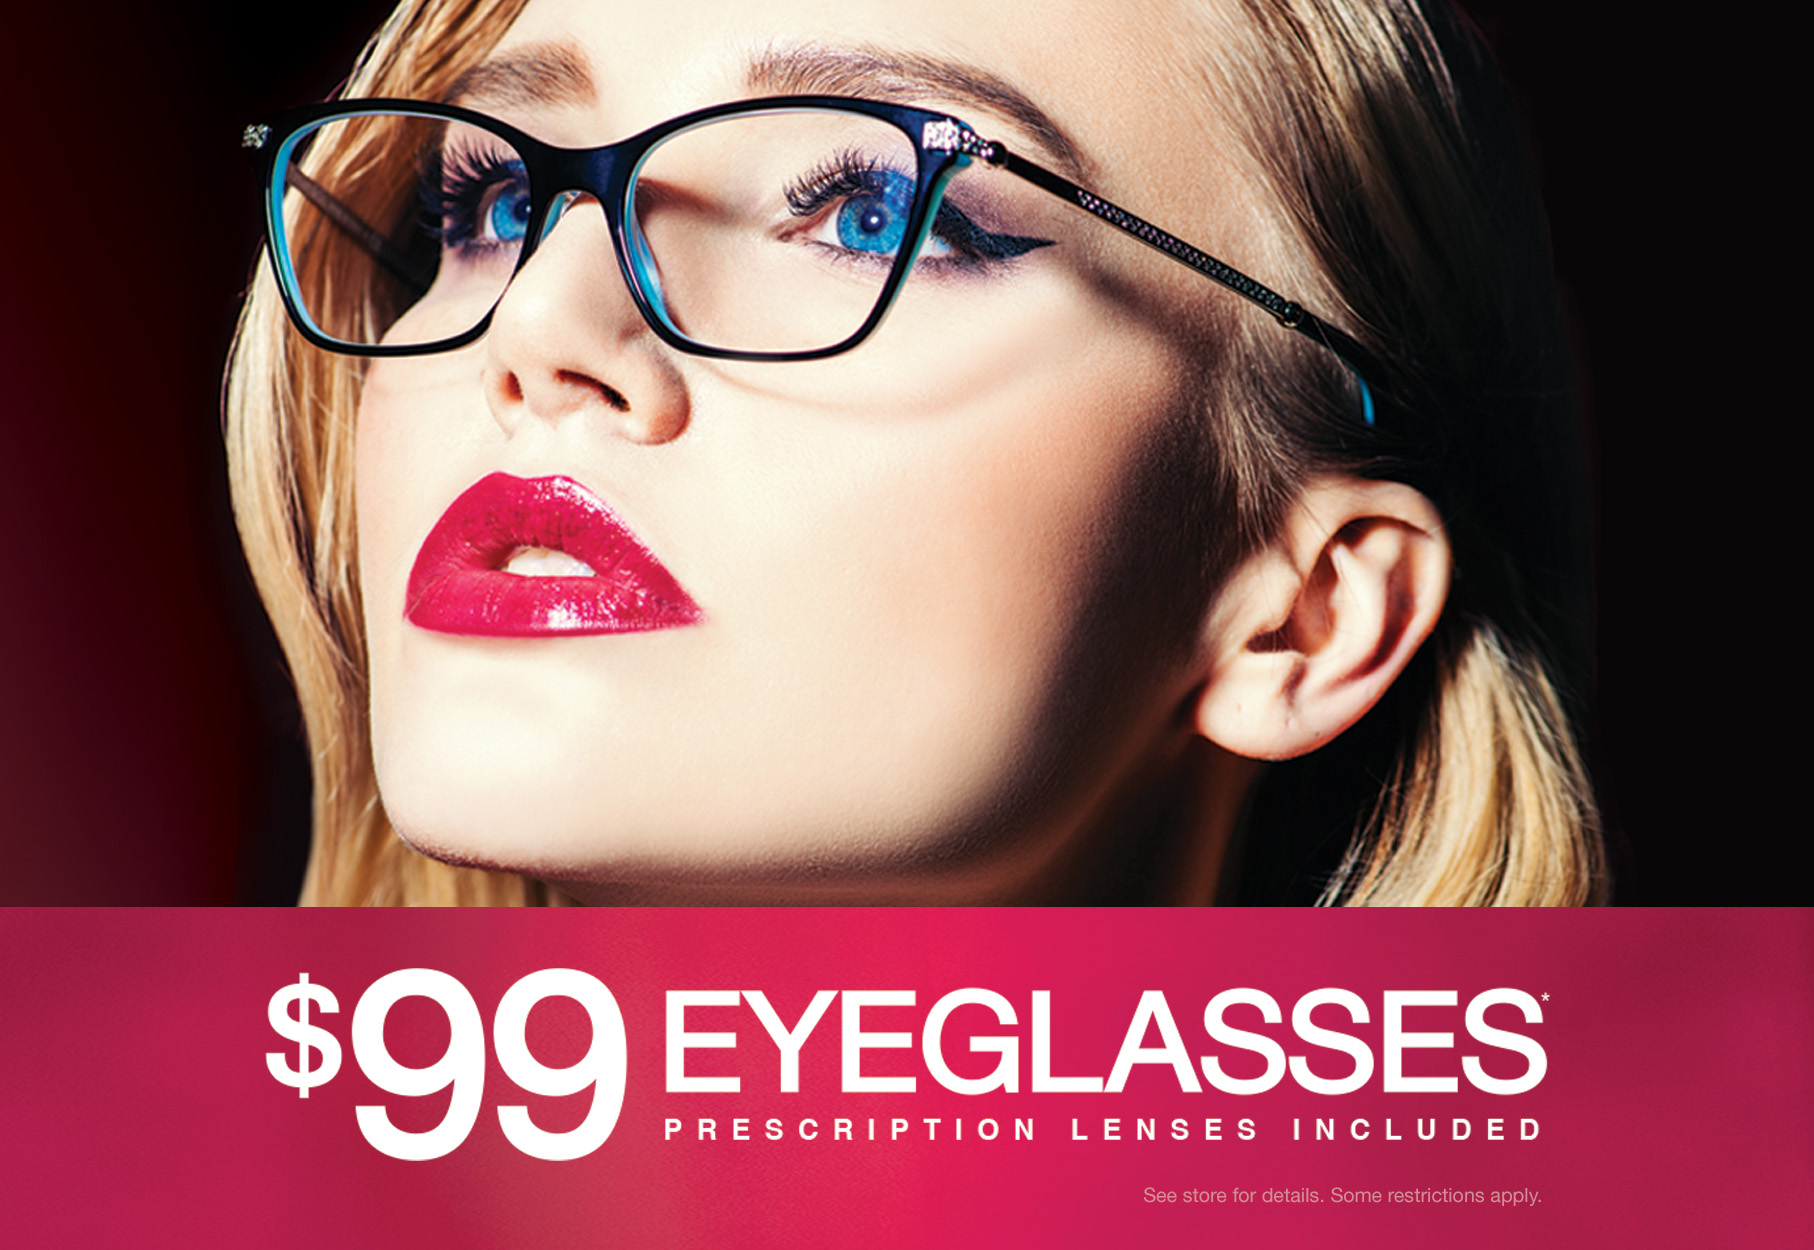 Text: $99 eyeglasses prescription lenses included See store for details. Some restrictions apply. Photo